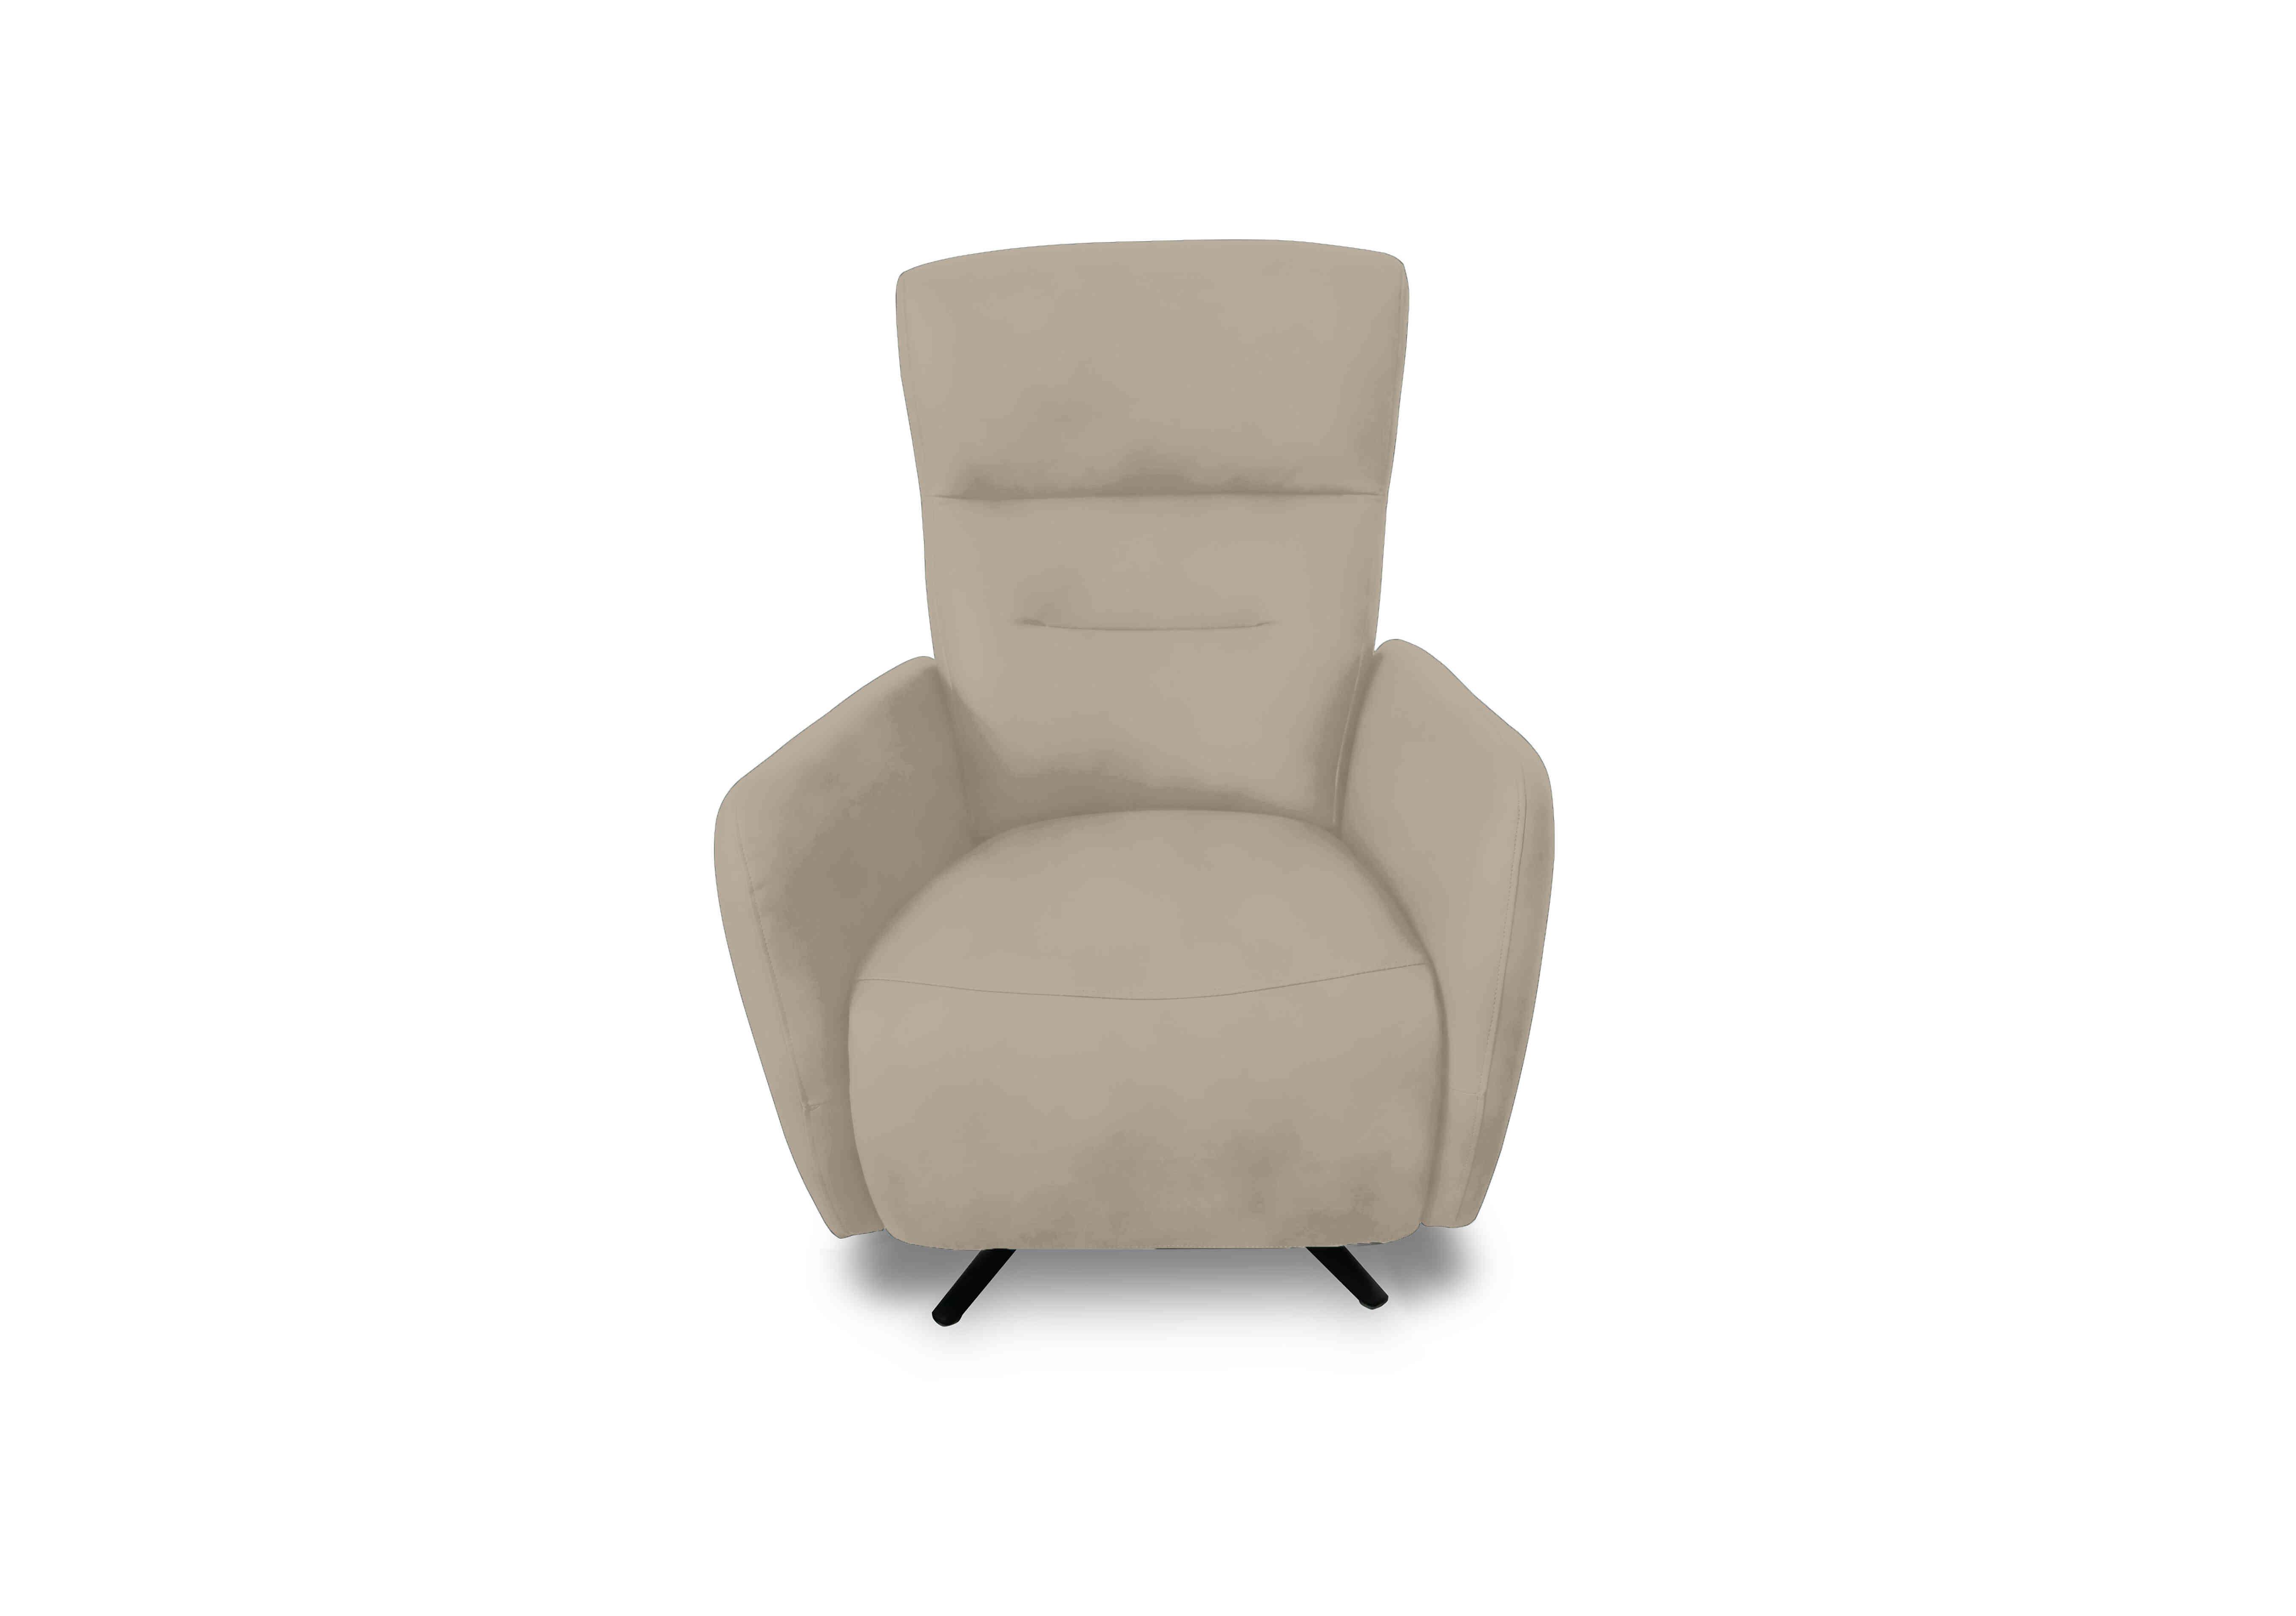 Designer Chair Collection Le Mans Fabric Dual Power Recliner Swivel Chair in Fab-Meg-R32 Light Khaki on Furniture Village